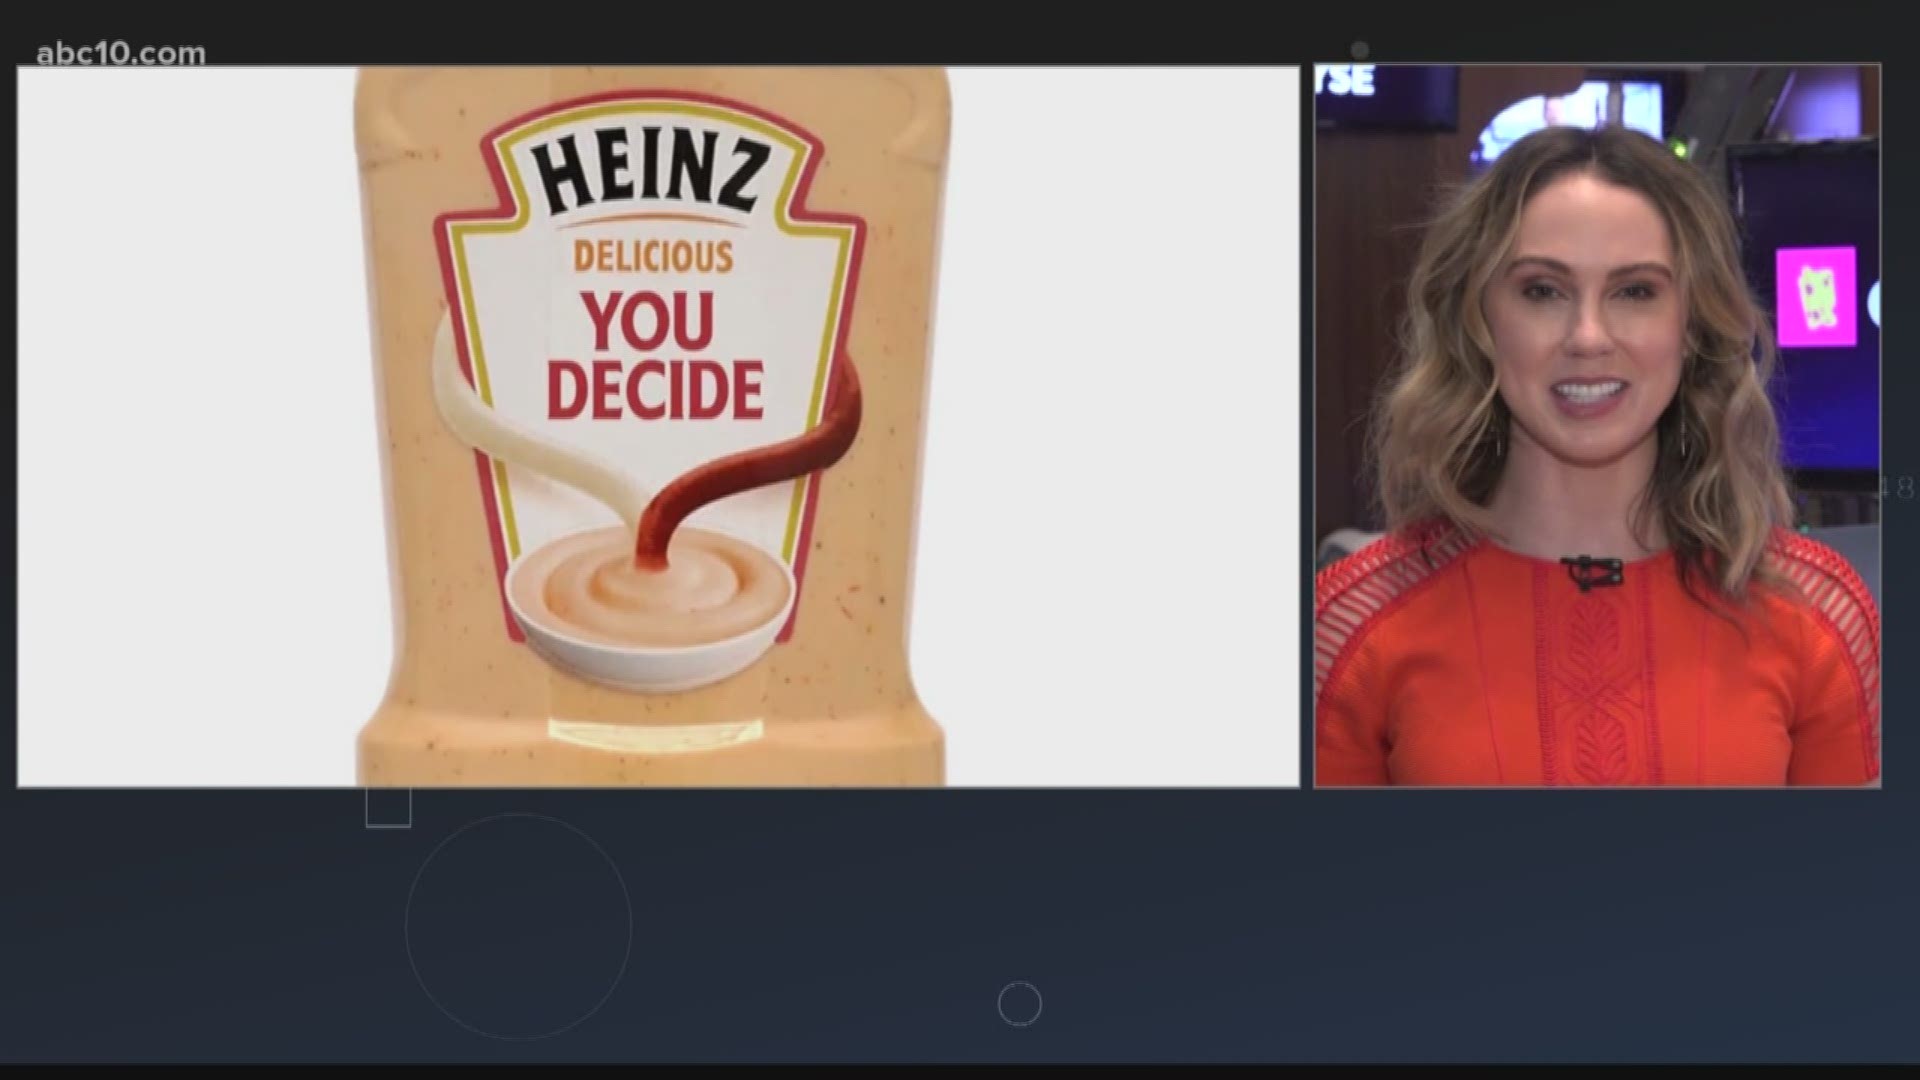 Walmart announces its redesigning its website to create a more personalized shopping. Apple is reportedly going to launch a premium news service. Also, Heinz making a combo sauce of ketchup and mayo?